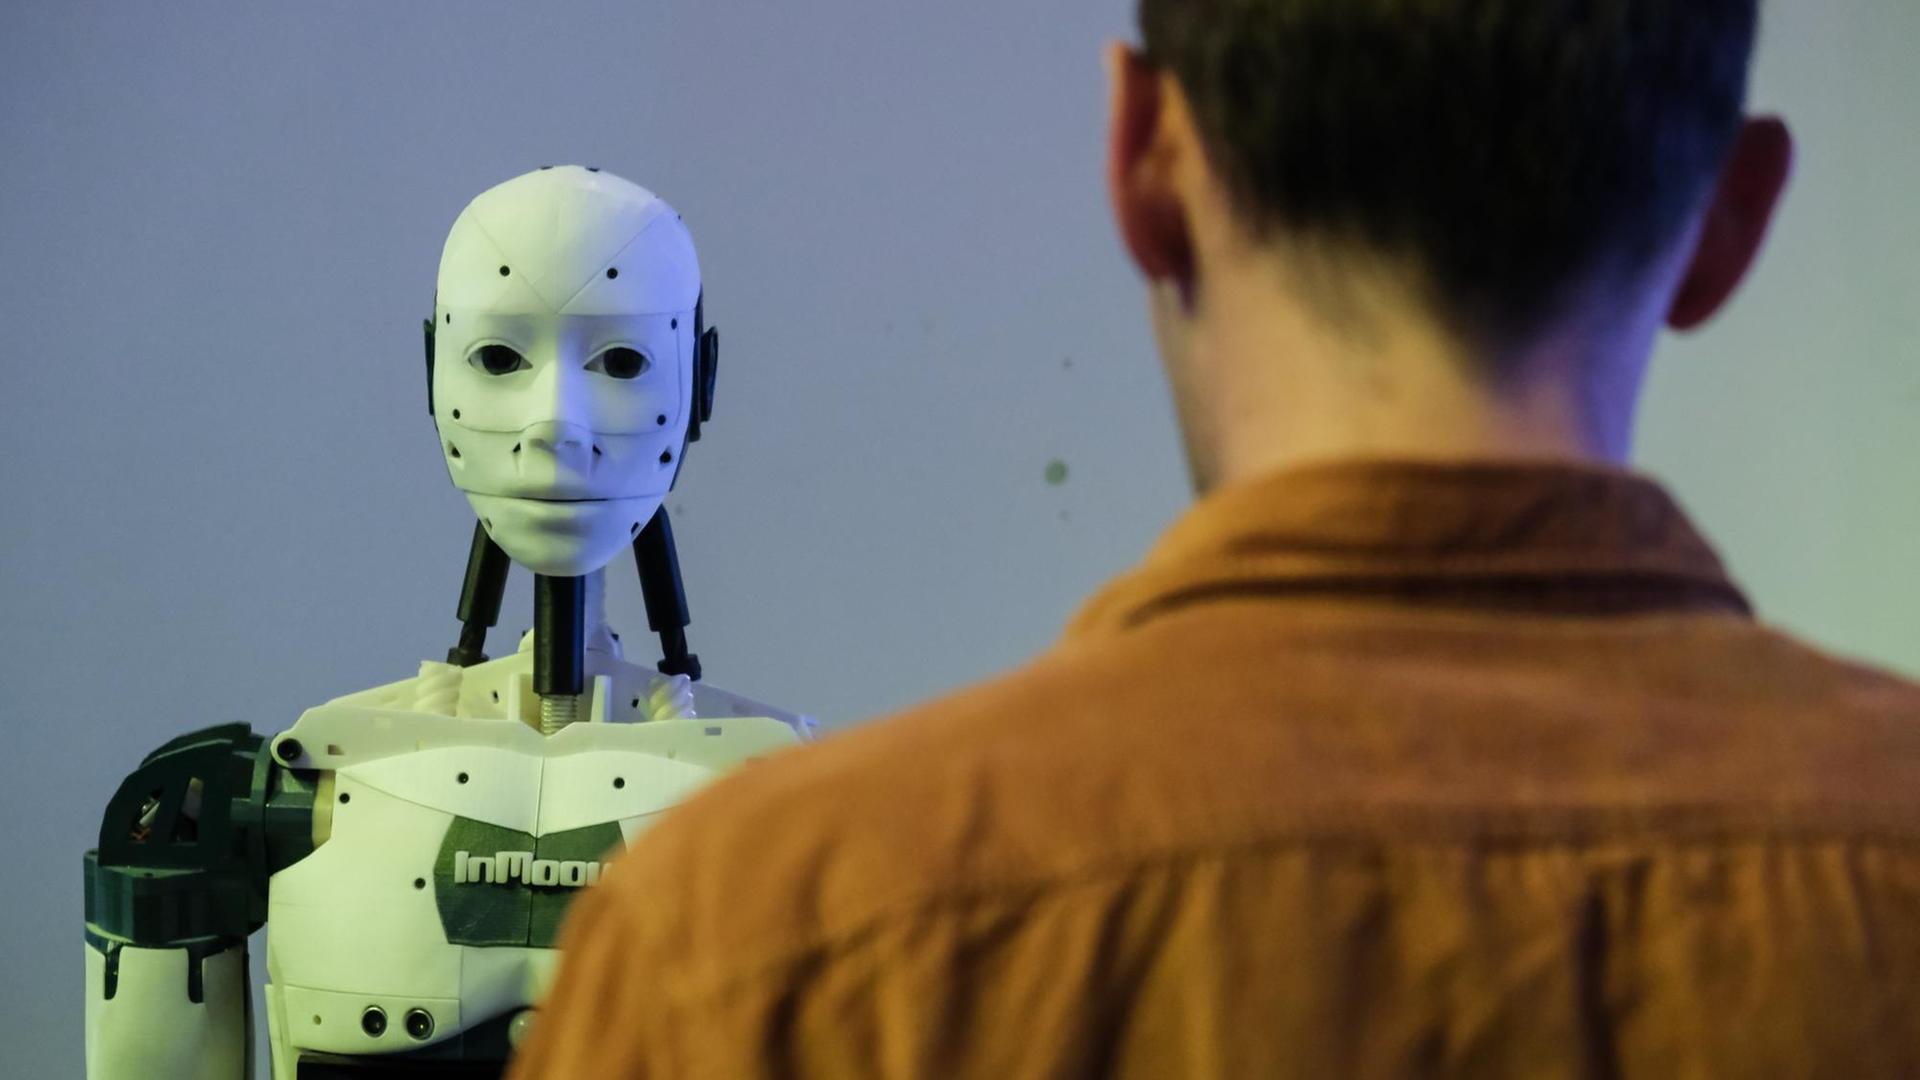 A humanoid robot. The seventh edition of Futurapolis, organized by Le Point magazine, was inaugurated in Toulouse (France) on November 16, 2018. For 2 days, the event, which is aimed at both the general public and businesses, is an opportunity to an inventory of technological advances, and to imagine the transformations of tomorrow. Photo by Patrick BATARD / ABACAPRESS.com |